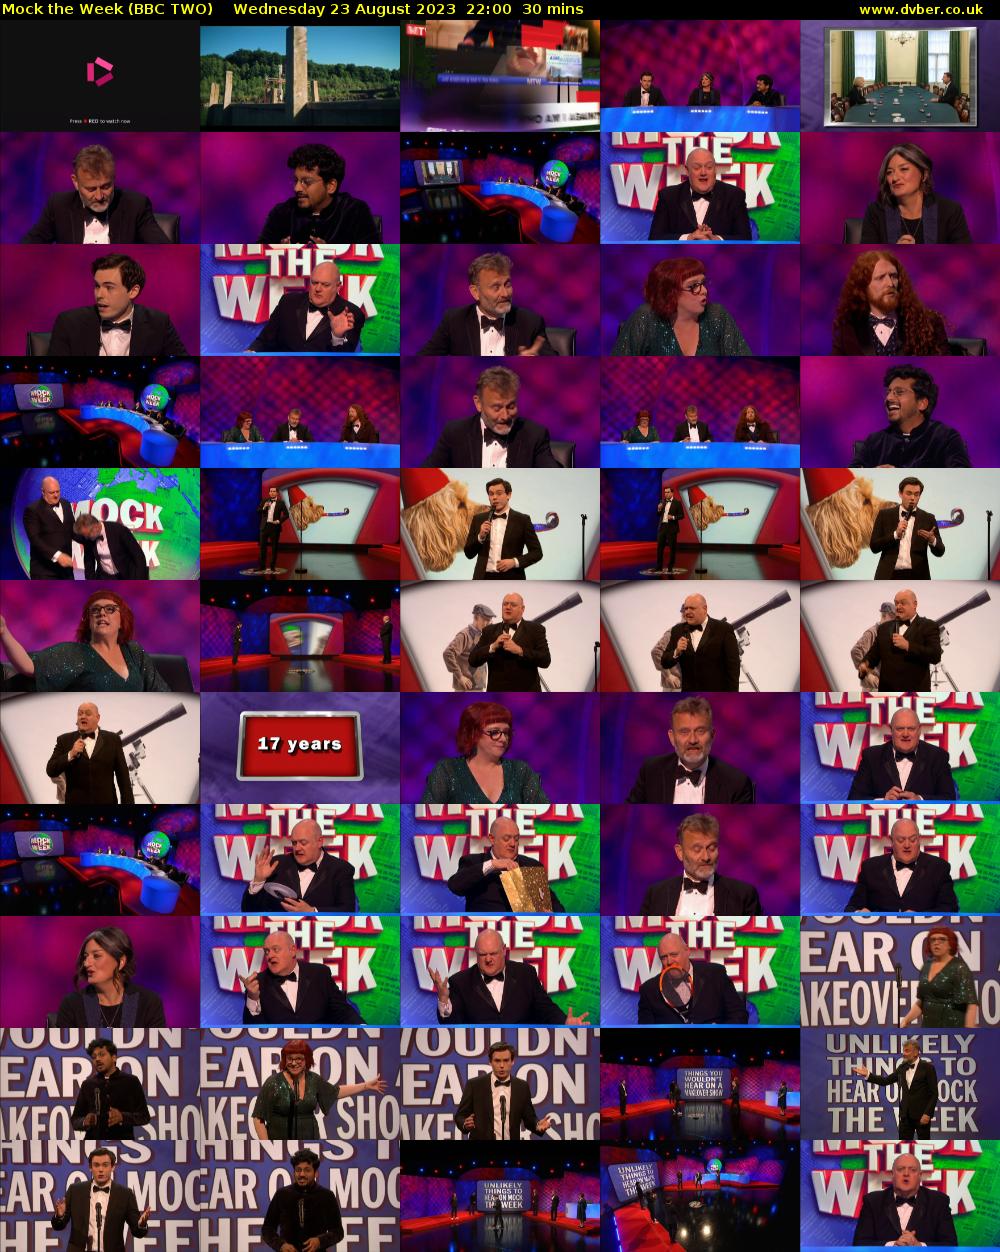 Mock the Week (BBC TWO) Wednesday 23 August 2023 22:00 - 22:30